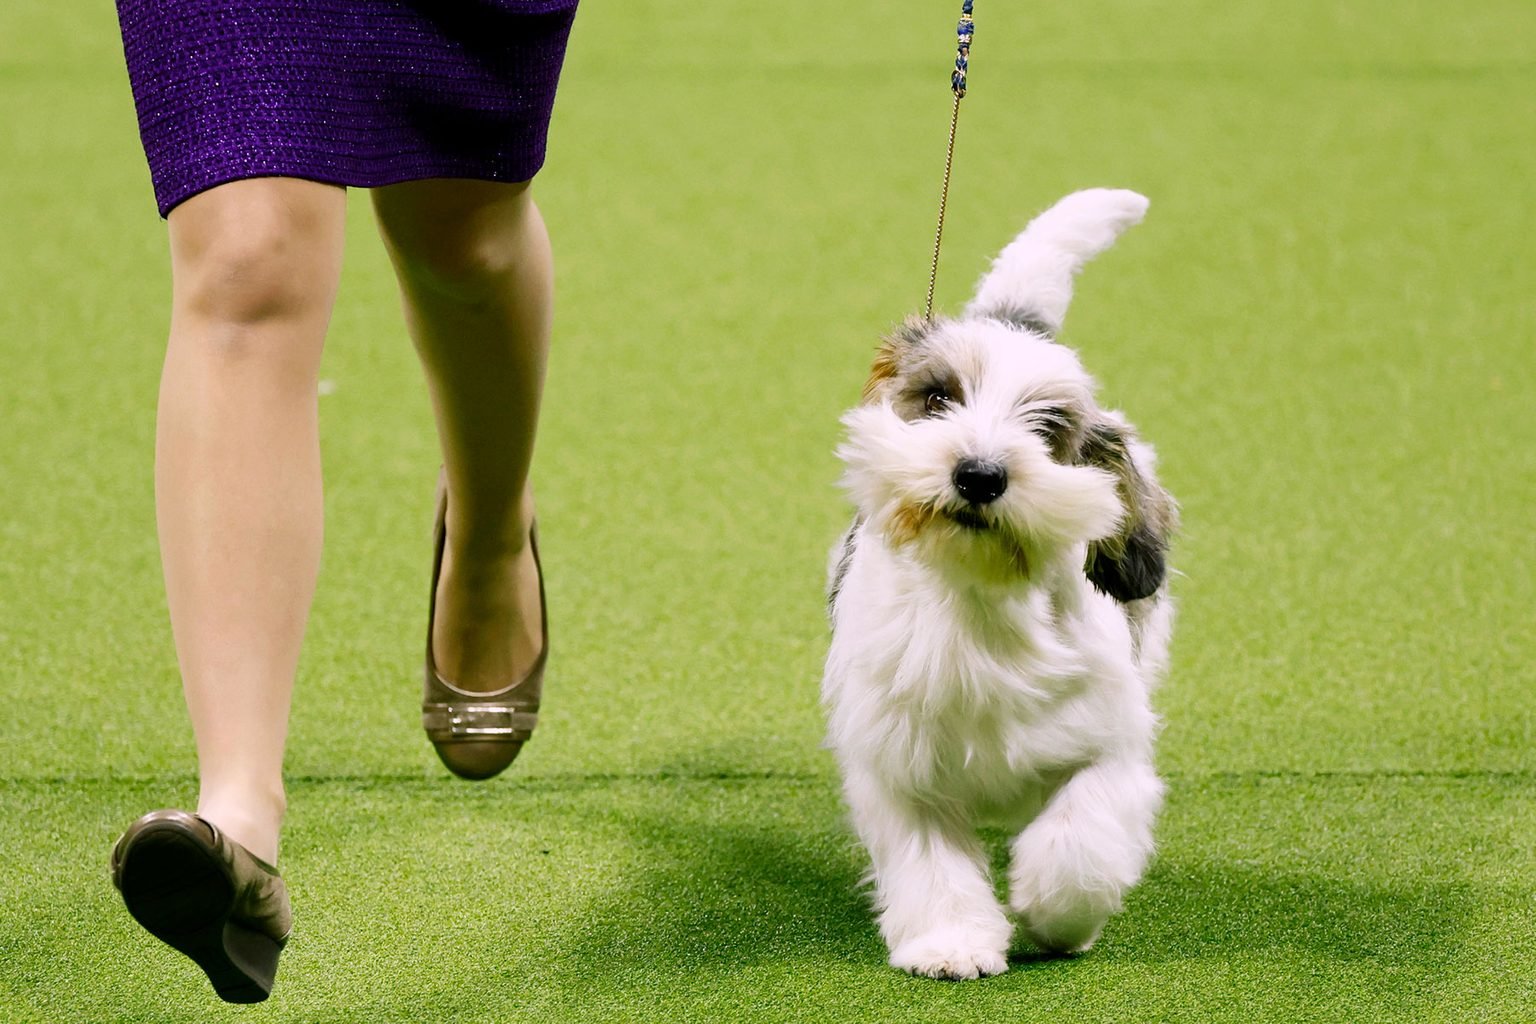 Meet Buddy Holly, the Pup That Just Won Best in Show at the Westminster